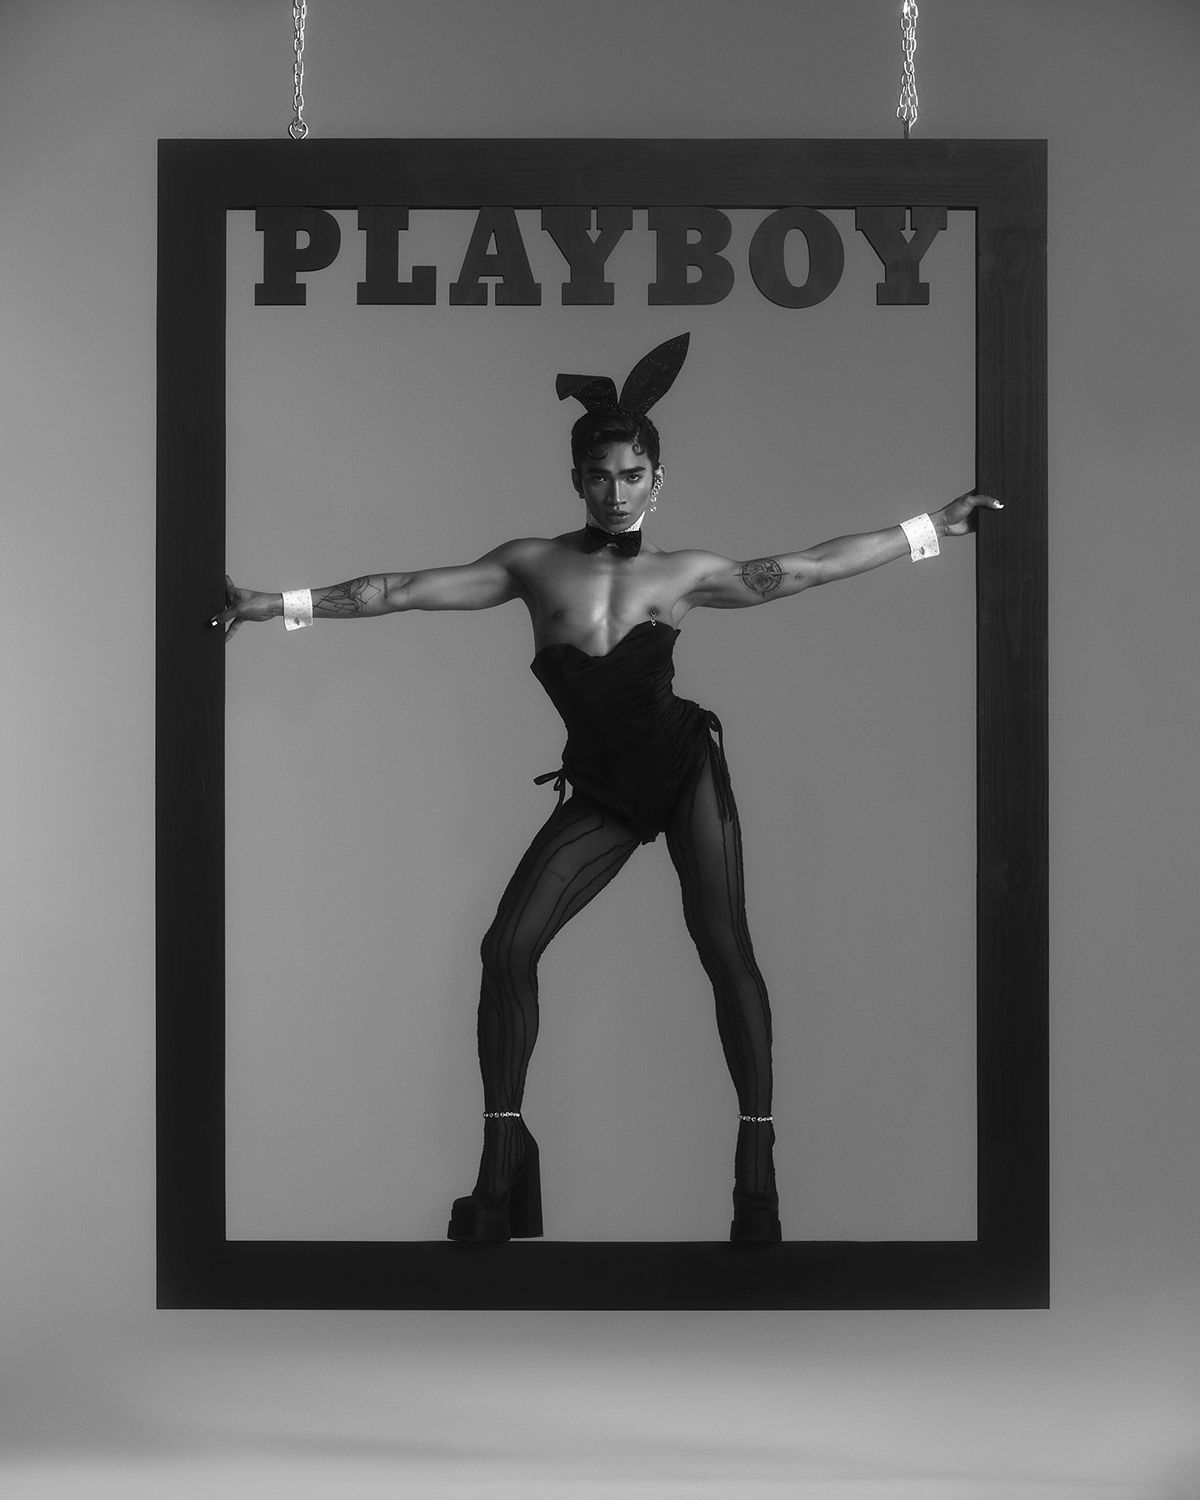 alisa mccutcheon recommends the man playboy show pic